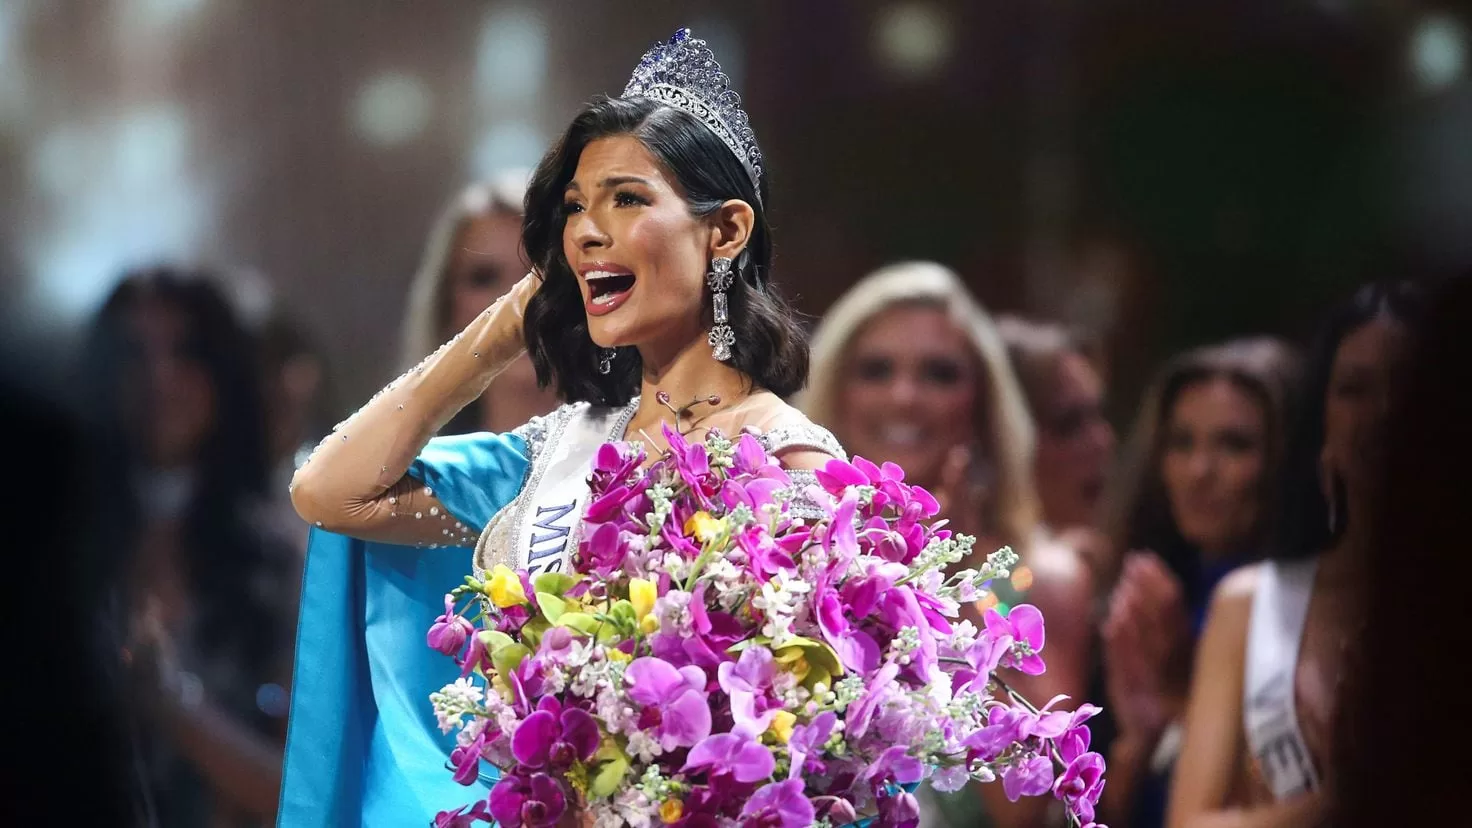 Miss Universe shines again
